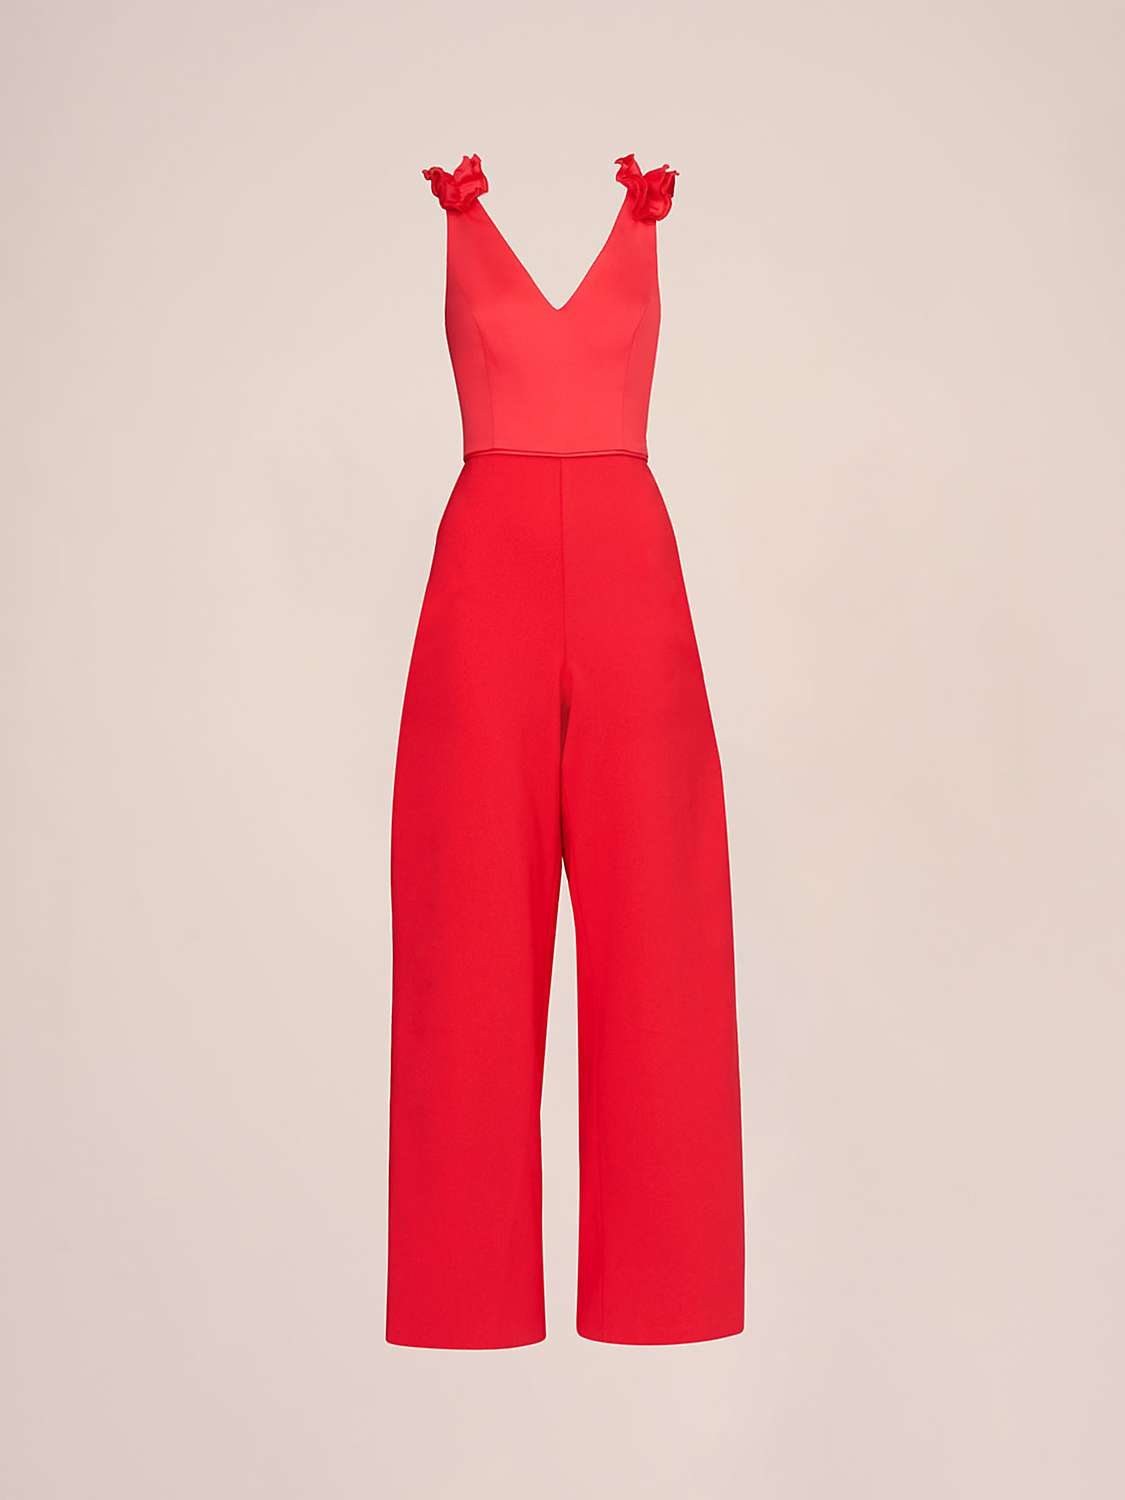 Buy Adrianna Papell Satin Crepe Wide Leg Jumpsuits, Calypso Coral Online at johnlewis.com